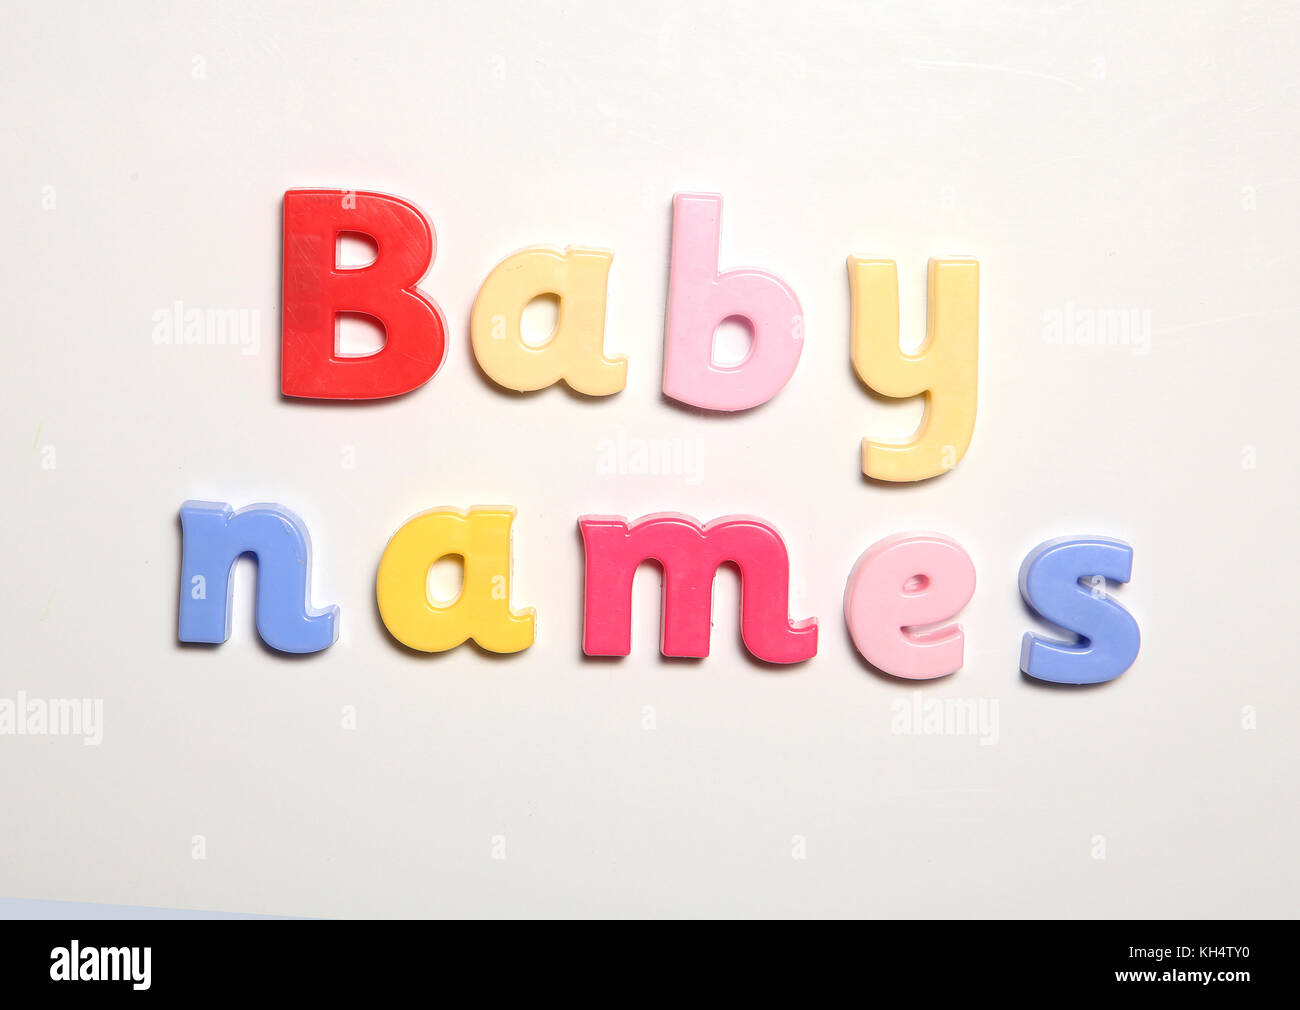 baby names spelt in magnet letters Stock Photo